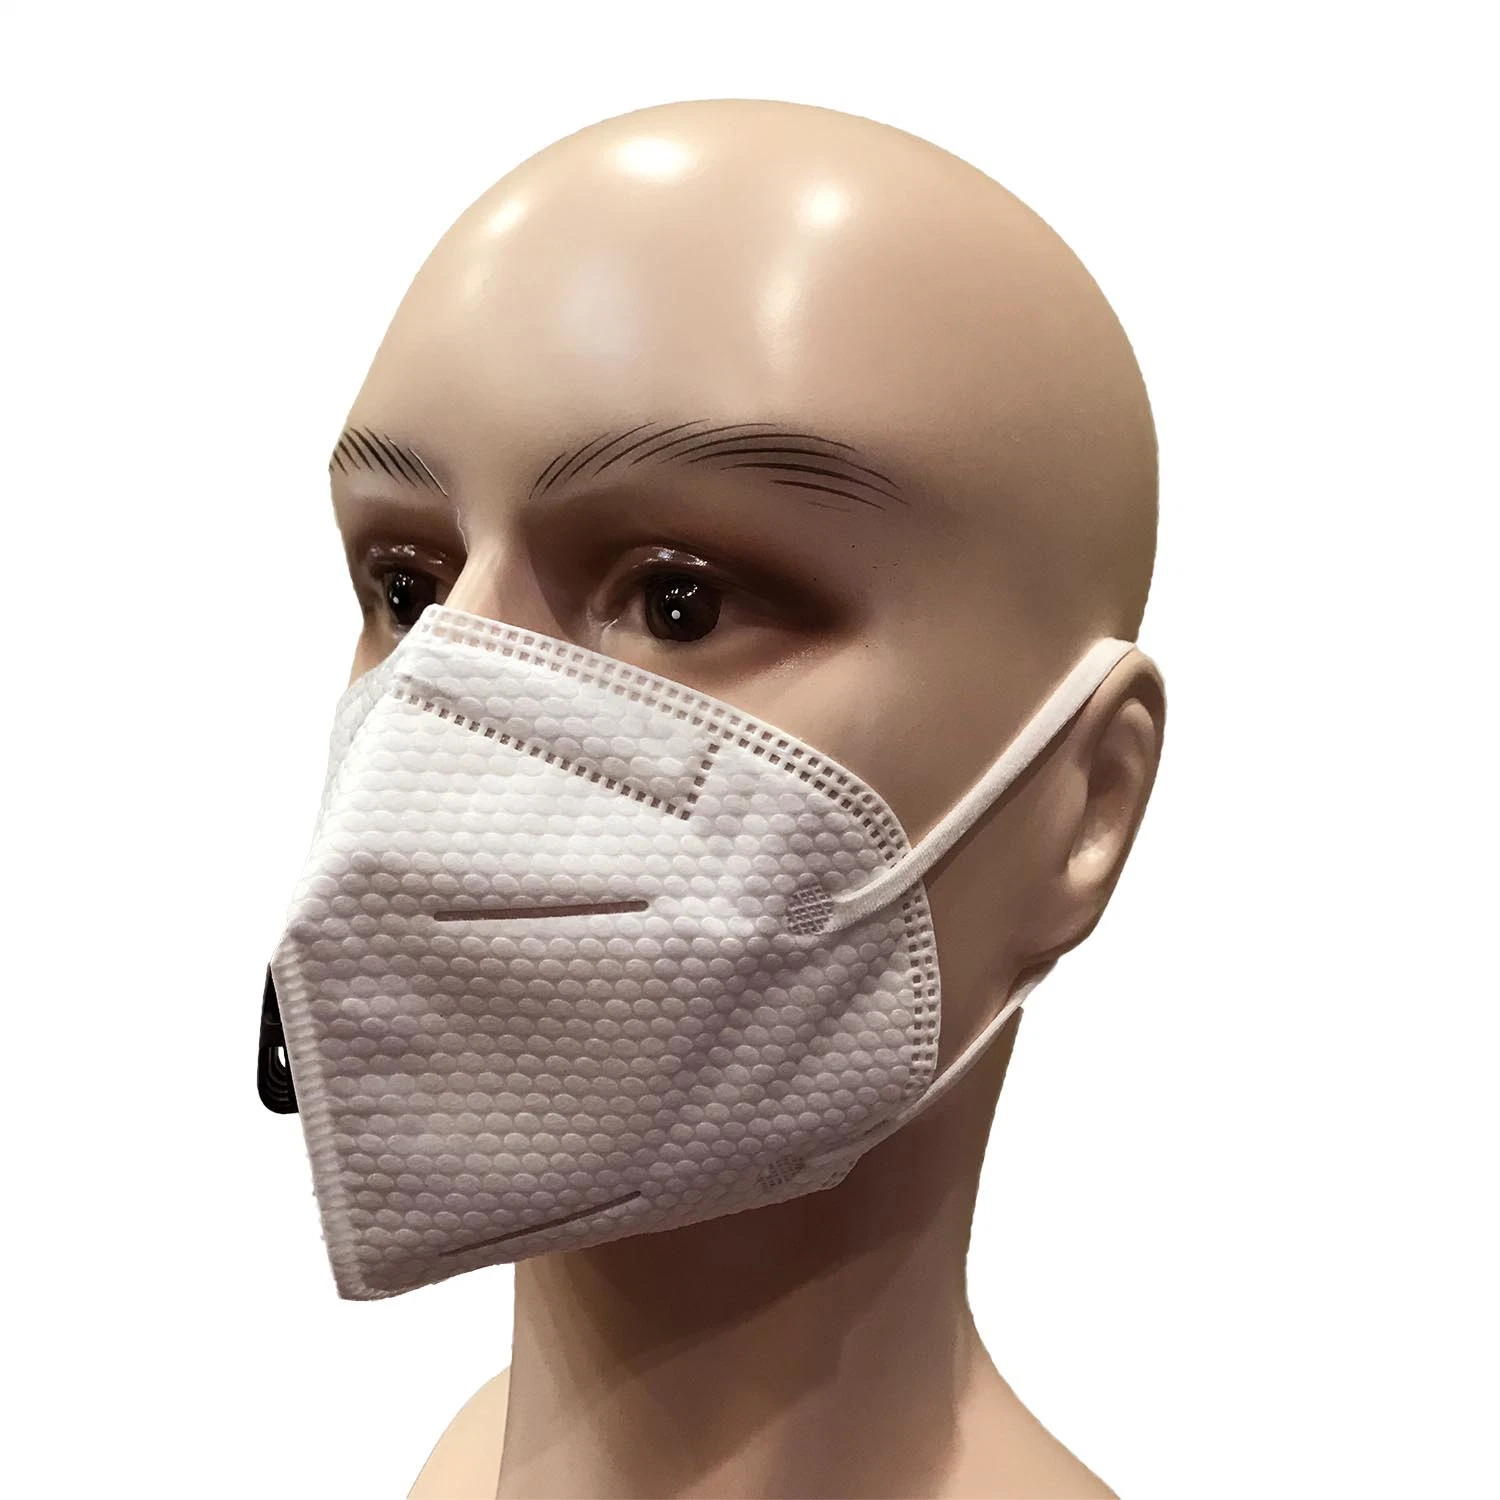 Vertical Foldable Type Chemical Mask /Face Mask/ Dust Mask/Haze Mask/Mask Face Mask/ Dust Mask/Nuisance Dust Mask Respirator